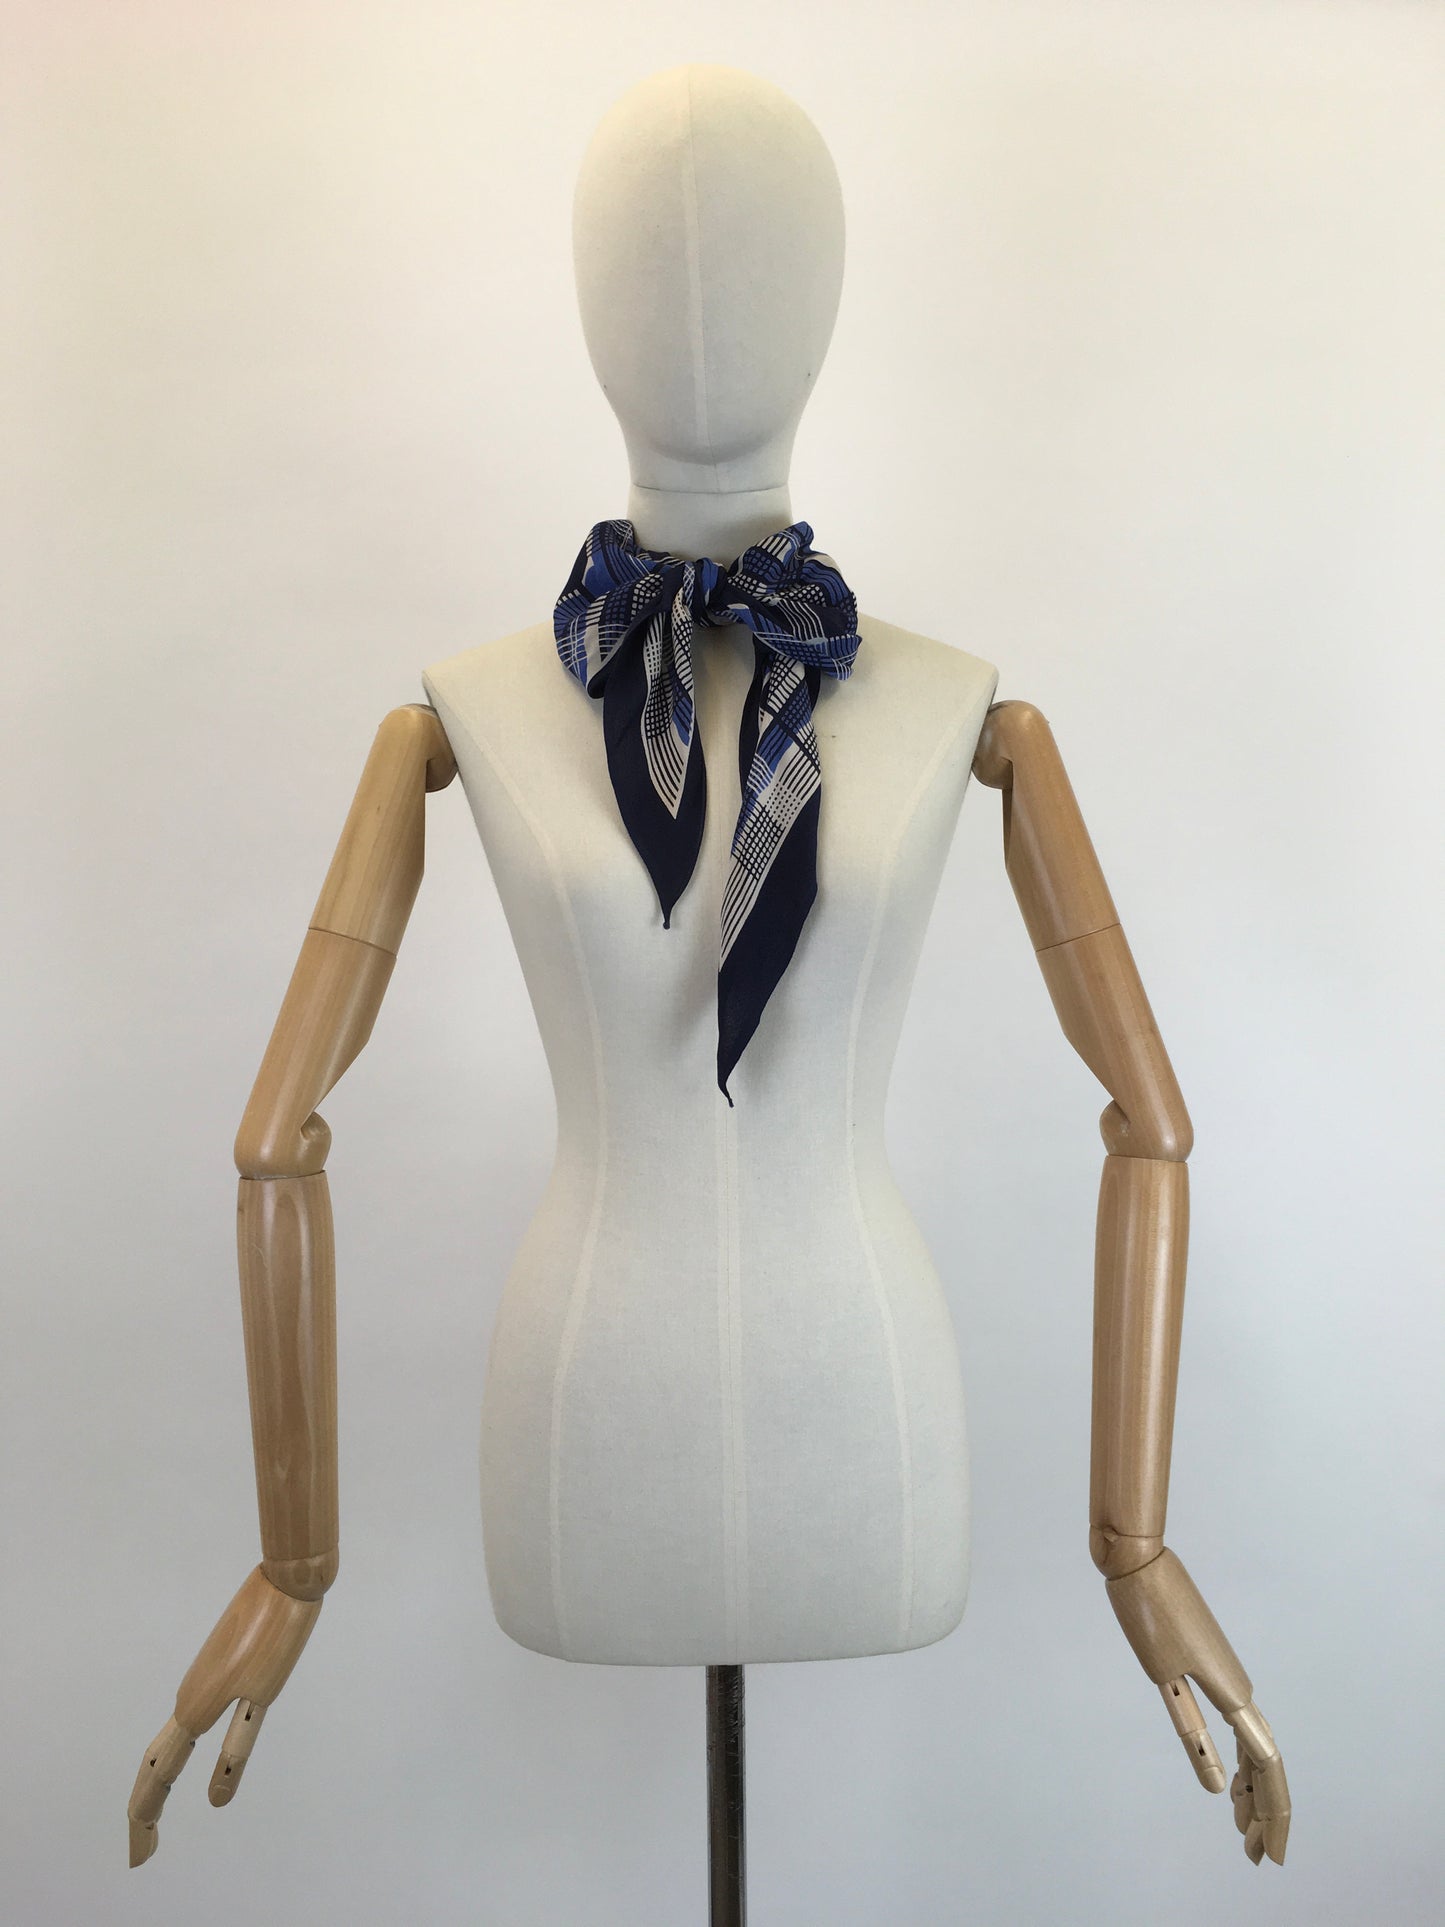 Original 1930’s Stunning Deco Pointed Scarf - In Navy, Cobalt Blue and White